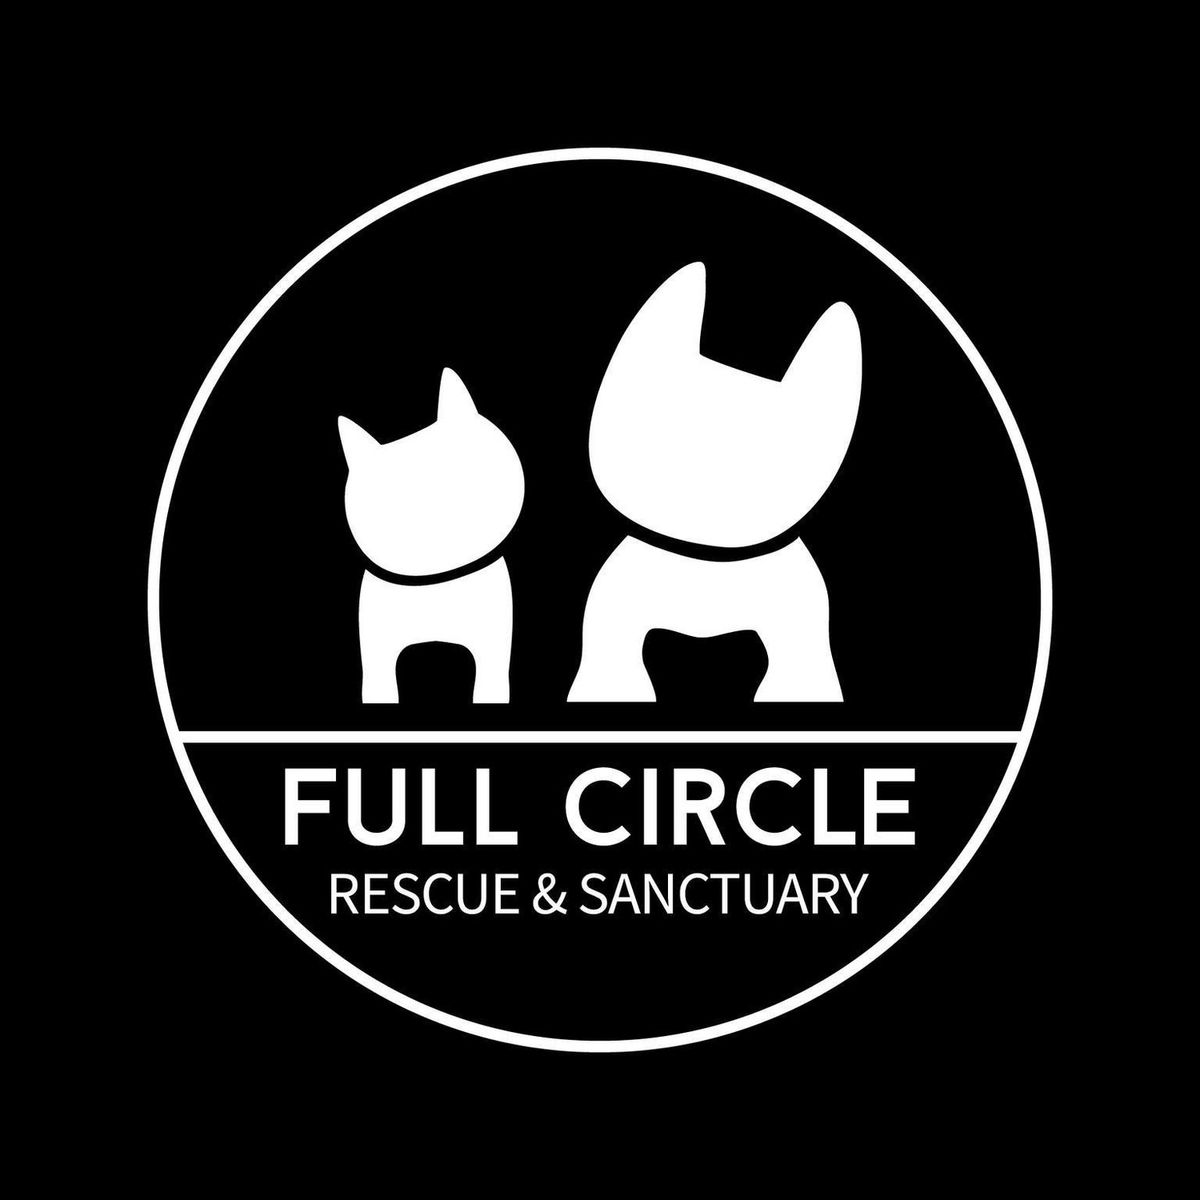 Adoption event for Full Circle Rescue and Sanctuary